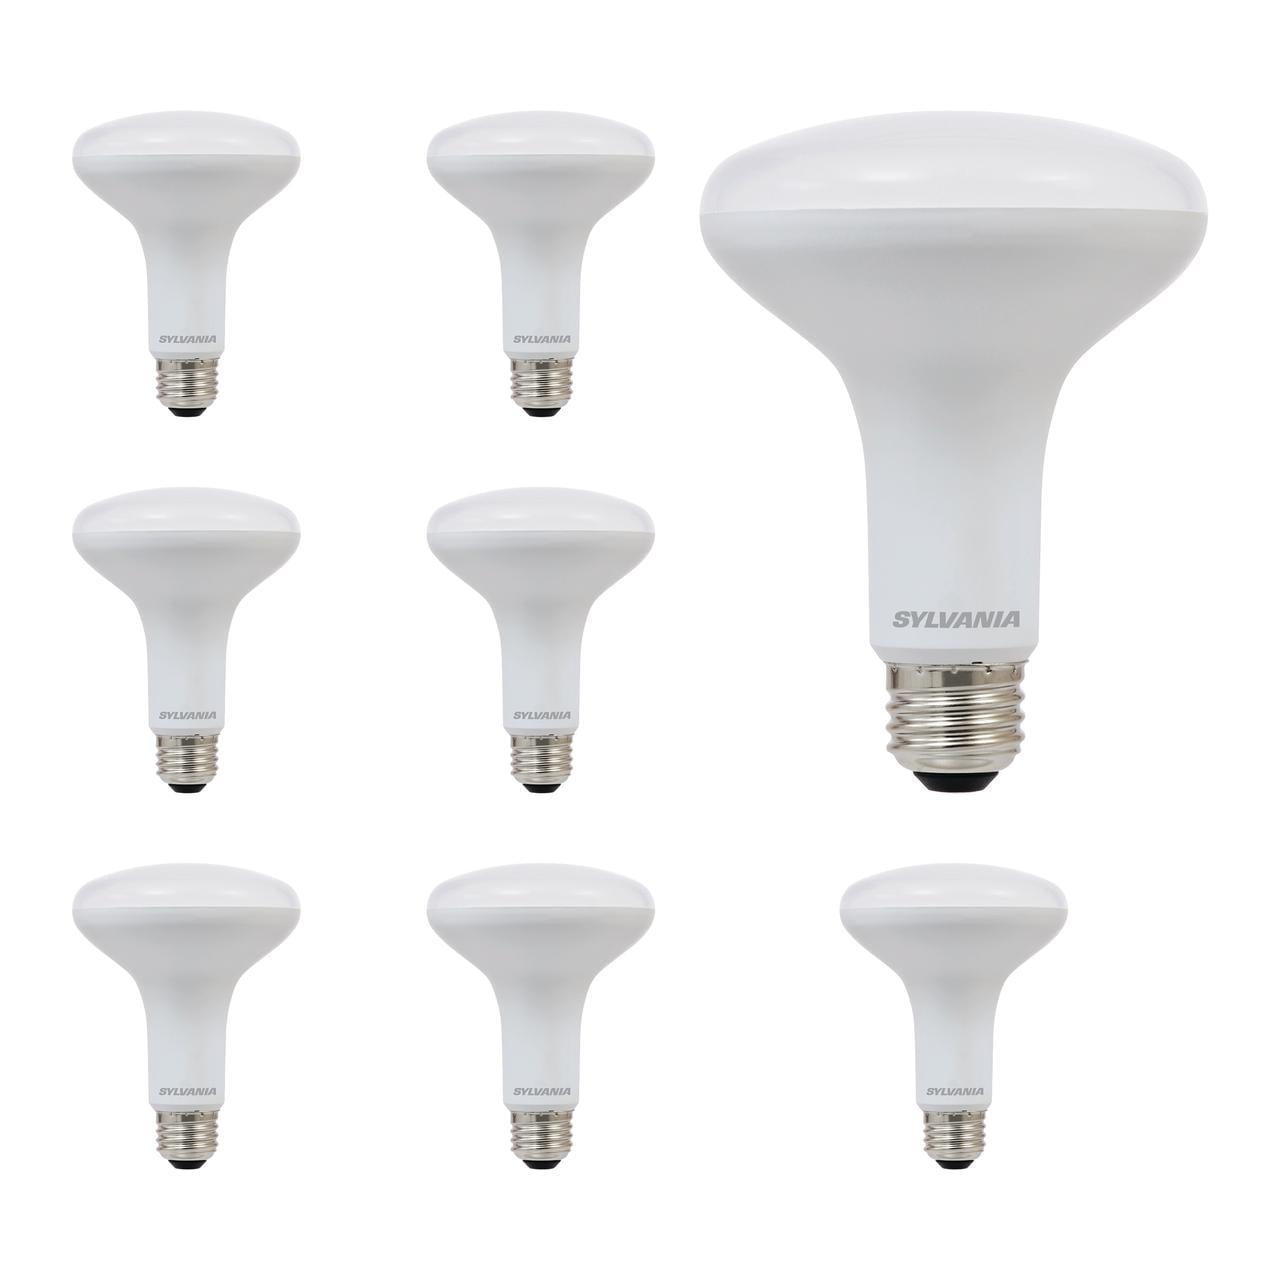 BRIGHT WHITE dimmable LED 60W Equiv SOFT WHITE DAYLIGHT SYLVANIA Light Bulbs 